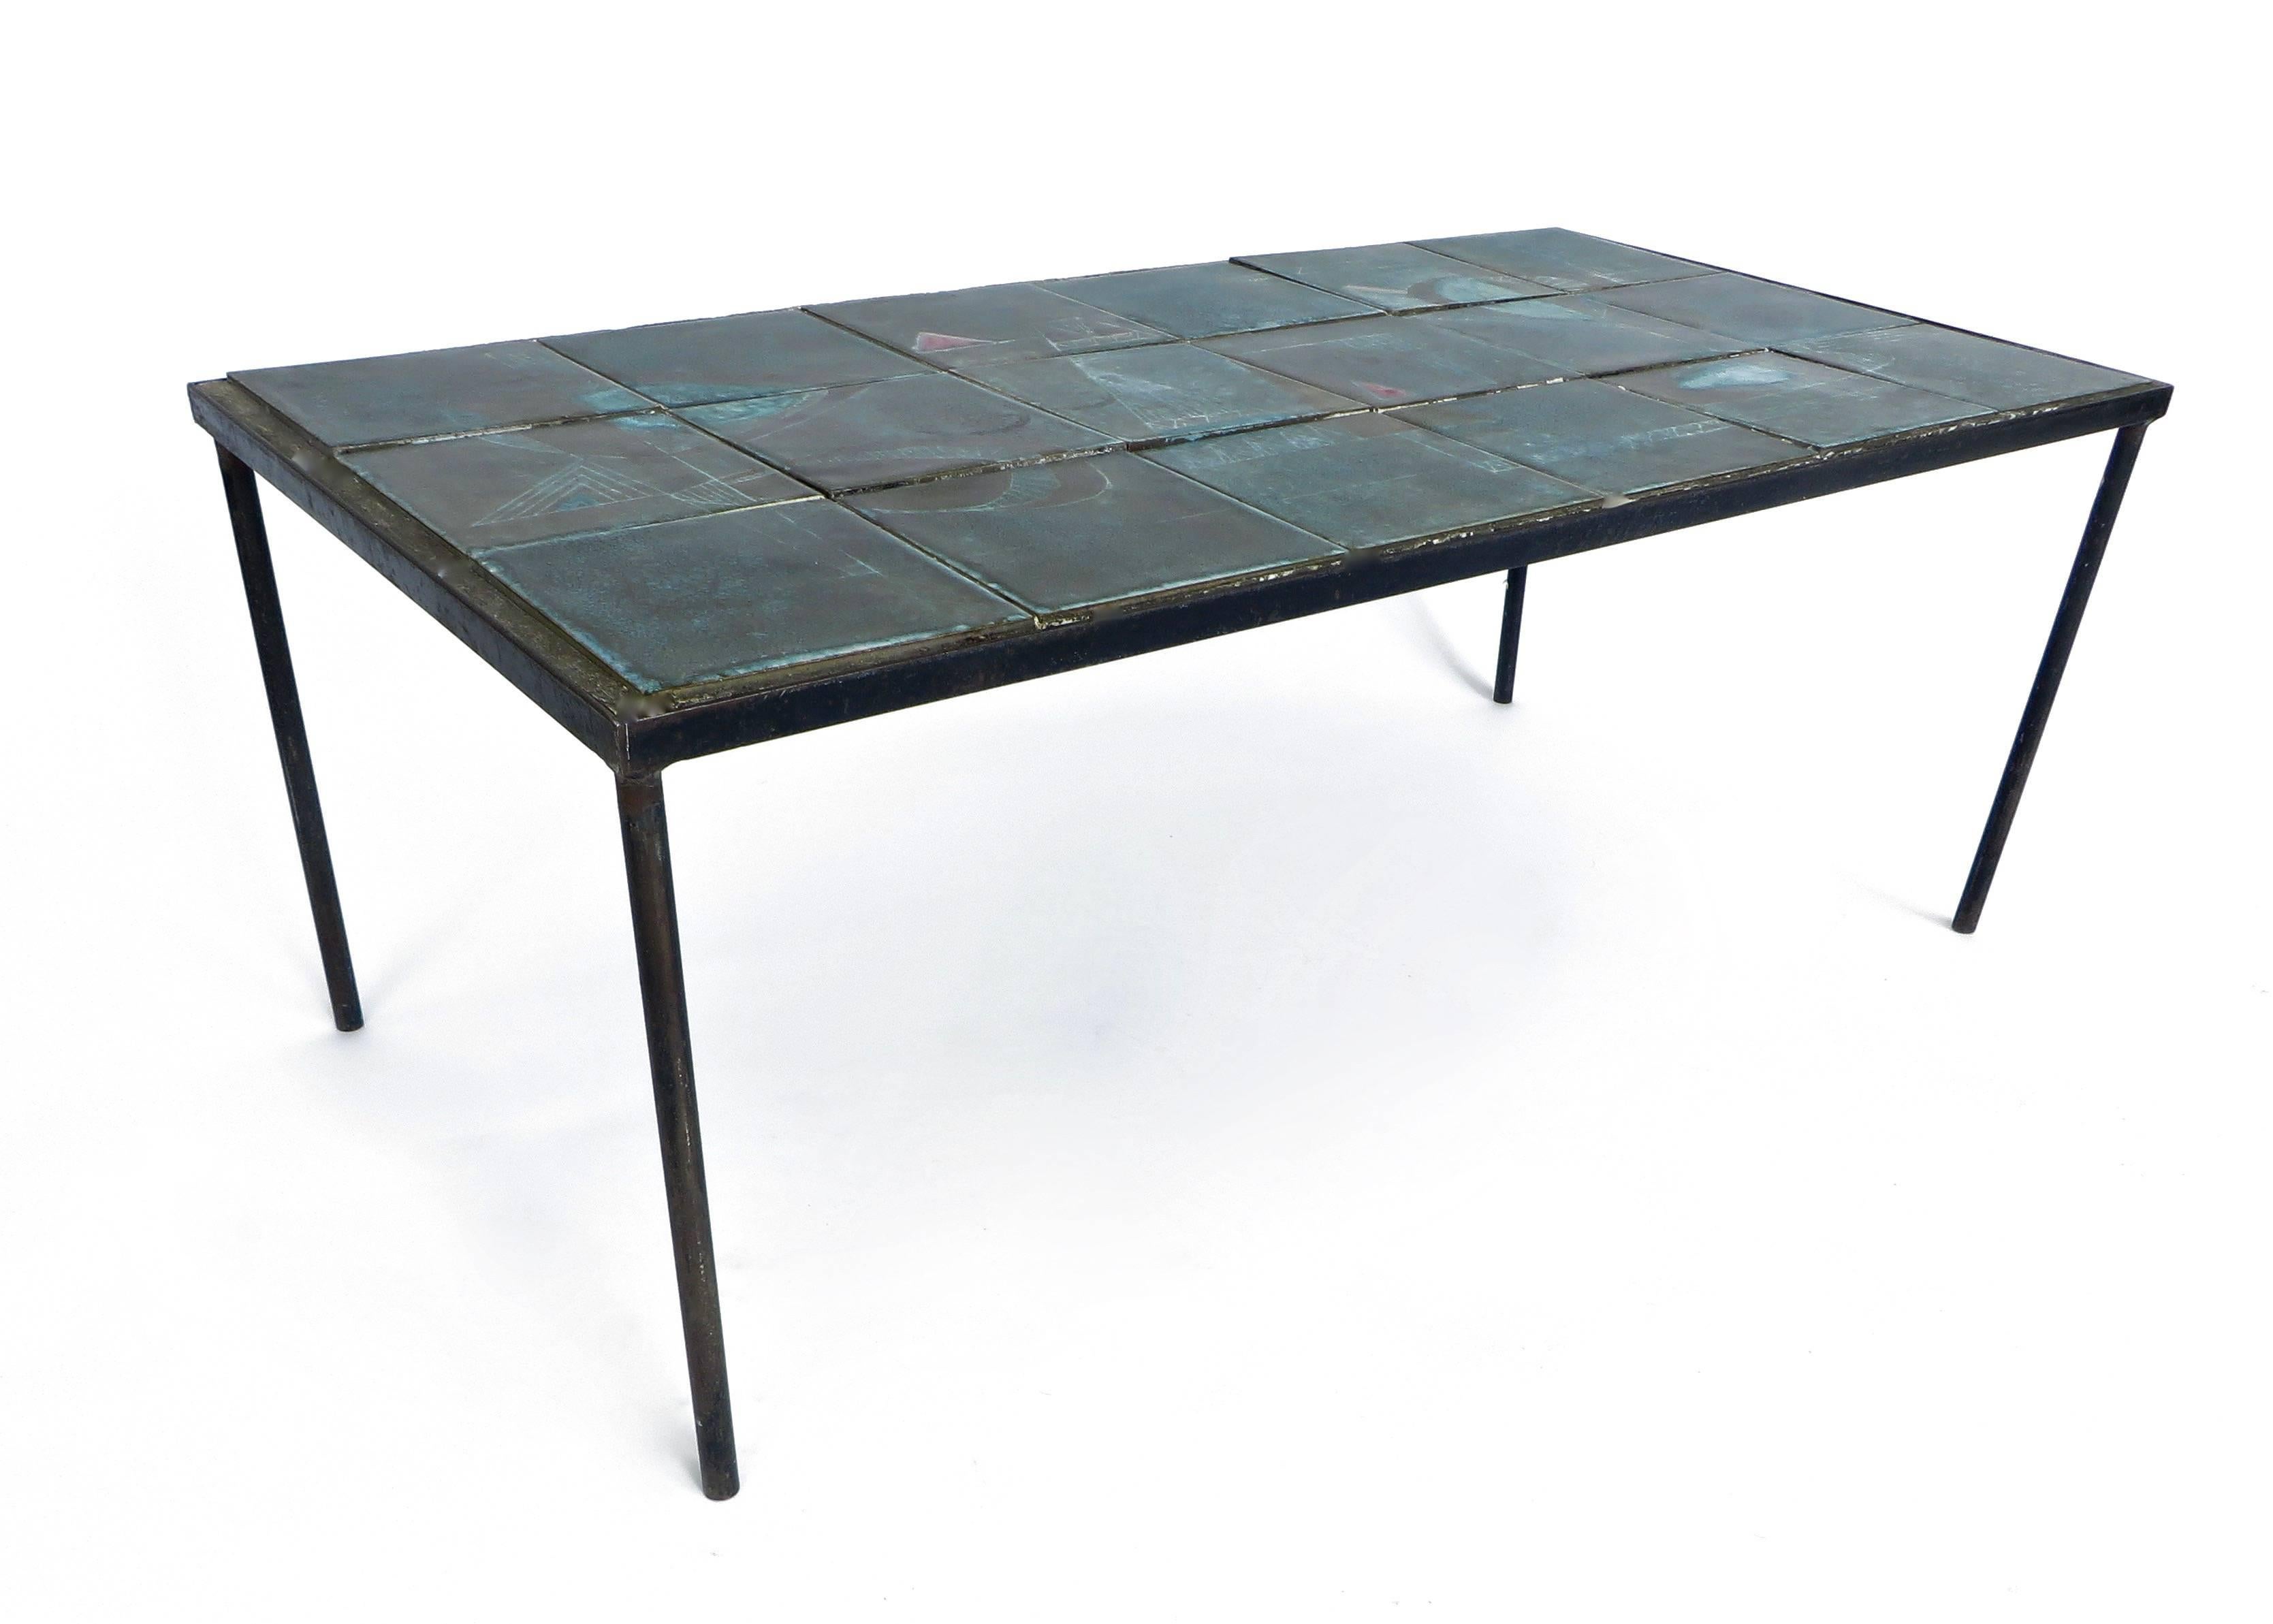 Ceramic tile toped table by Les Deux Potiers (Robert Charlier & Pierre Langlé) in the iconic blue glaze they were so well-known for with a wonderful iconic abstract painted motif. Unsigned. 
Similar to many that appear in the book Les 2 Potiers by